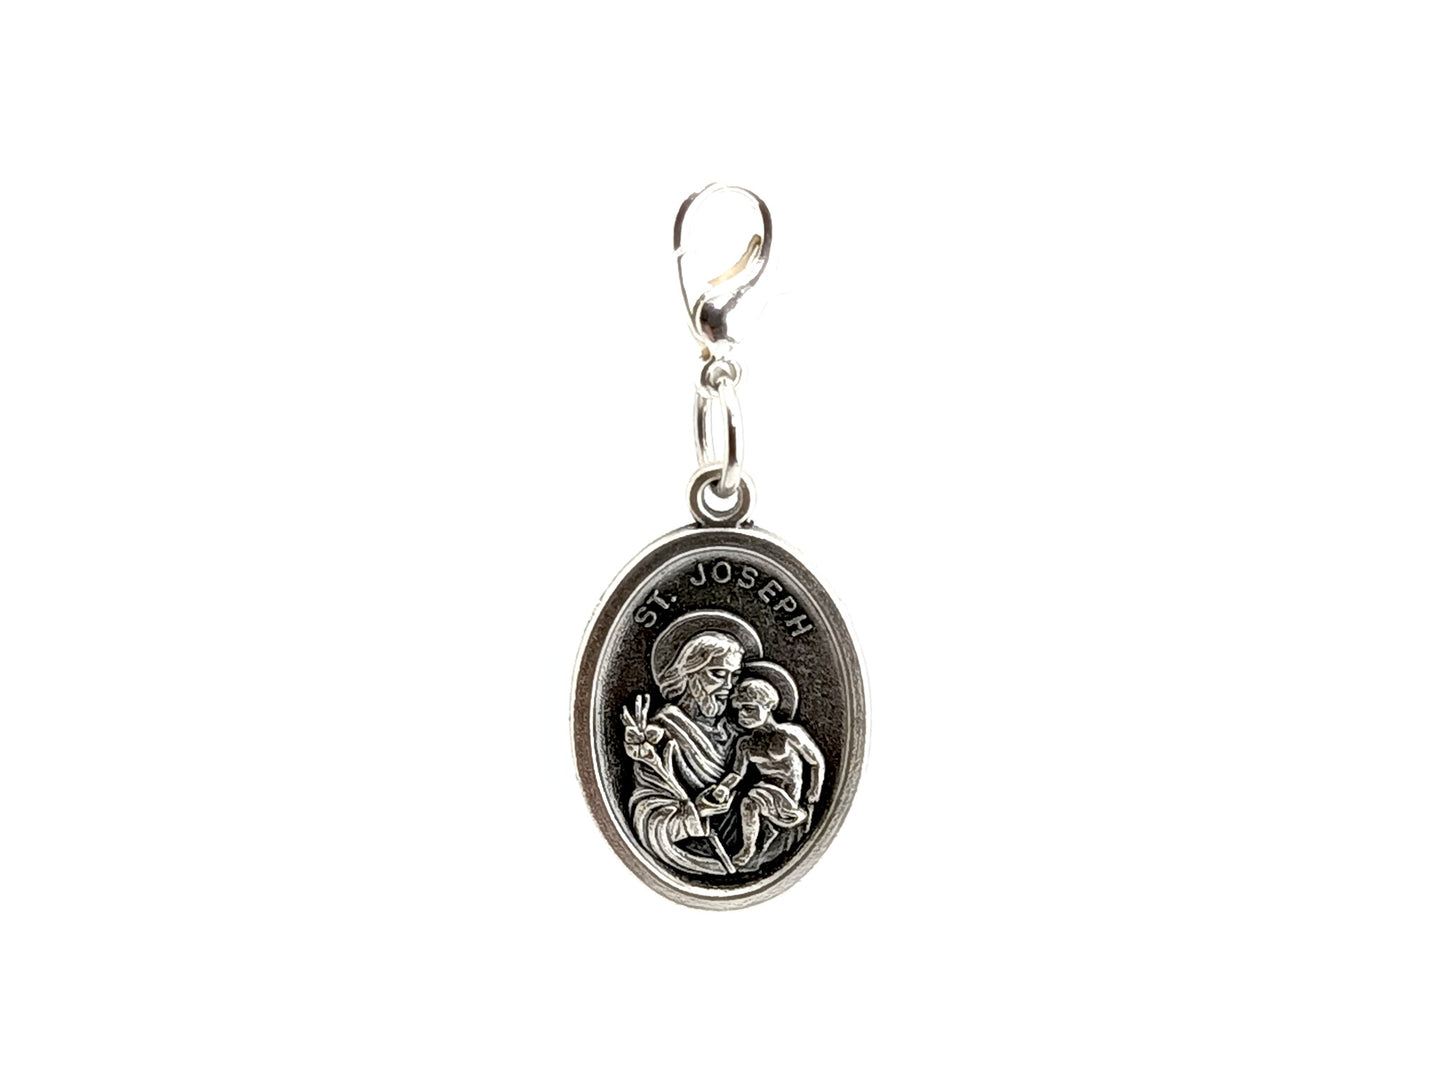 Saint Joseph unique rosary beads devotional alloy relic touch medal with silver plated lobster clasp.